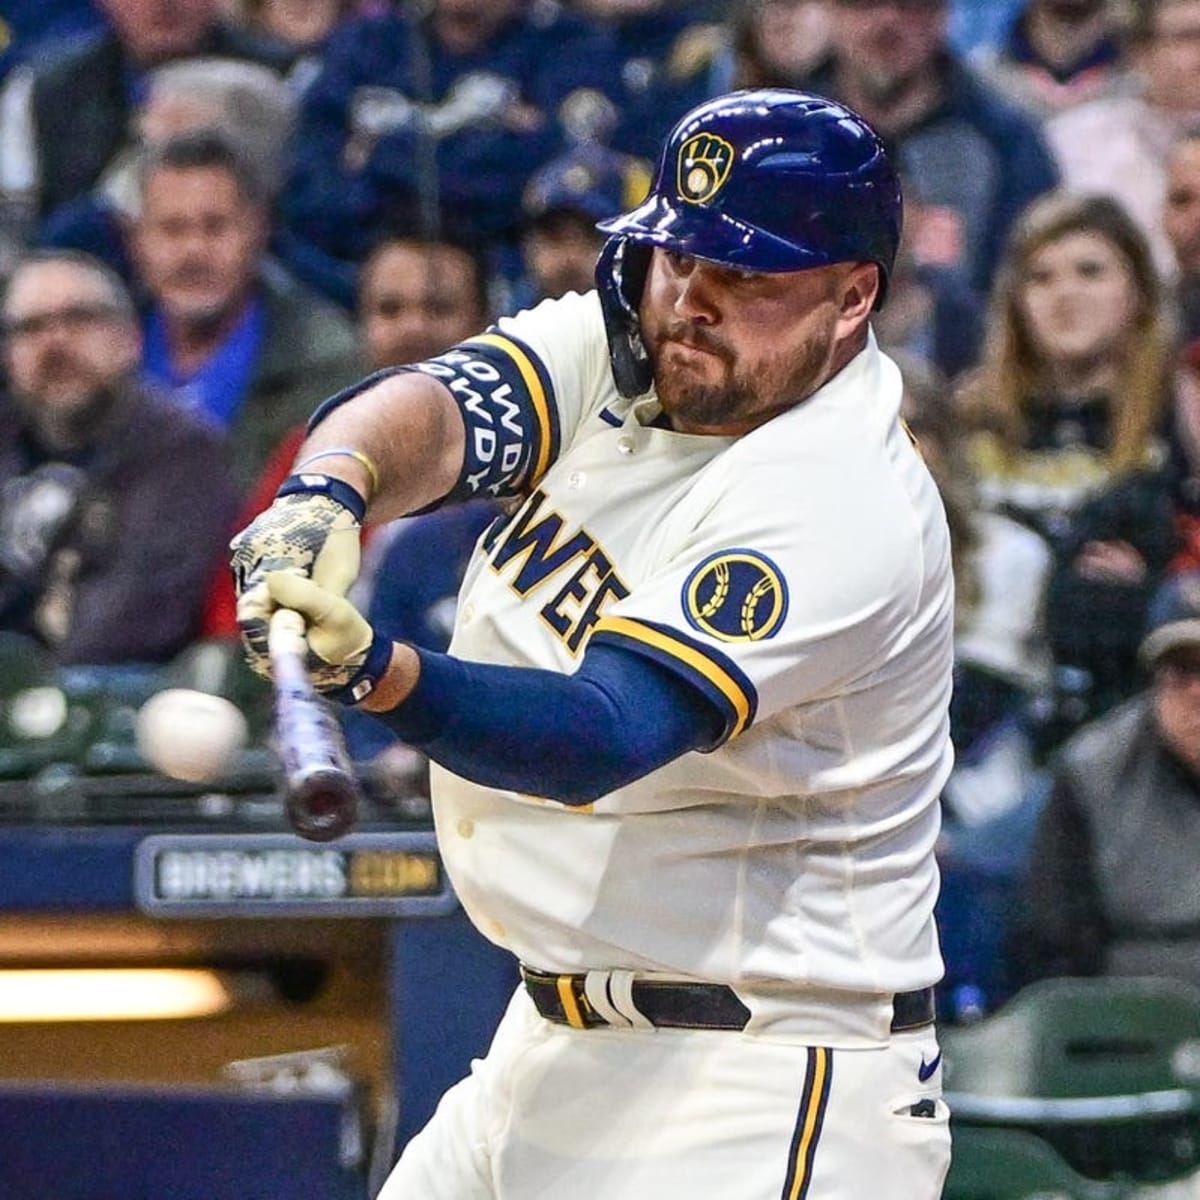 3 Willy Adames Stats That Tell How He Impacts the Brewers